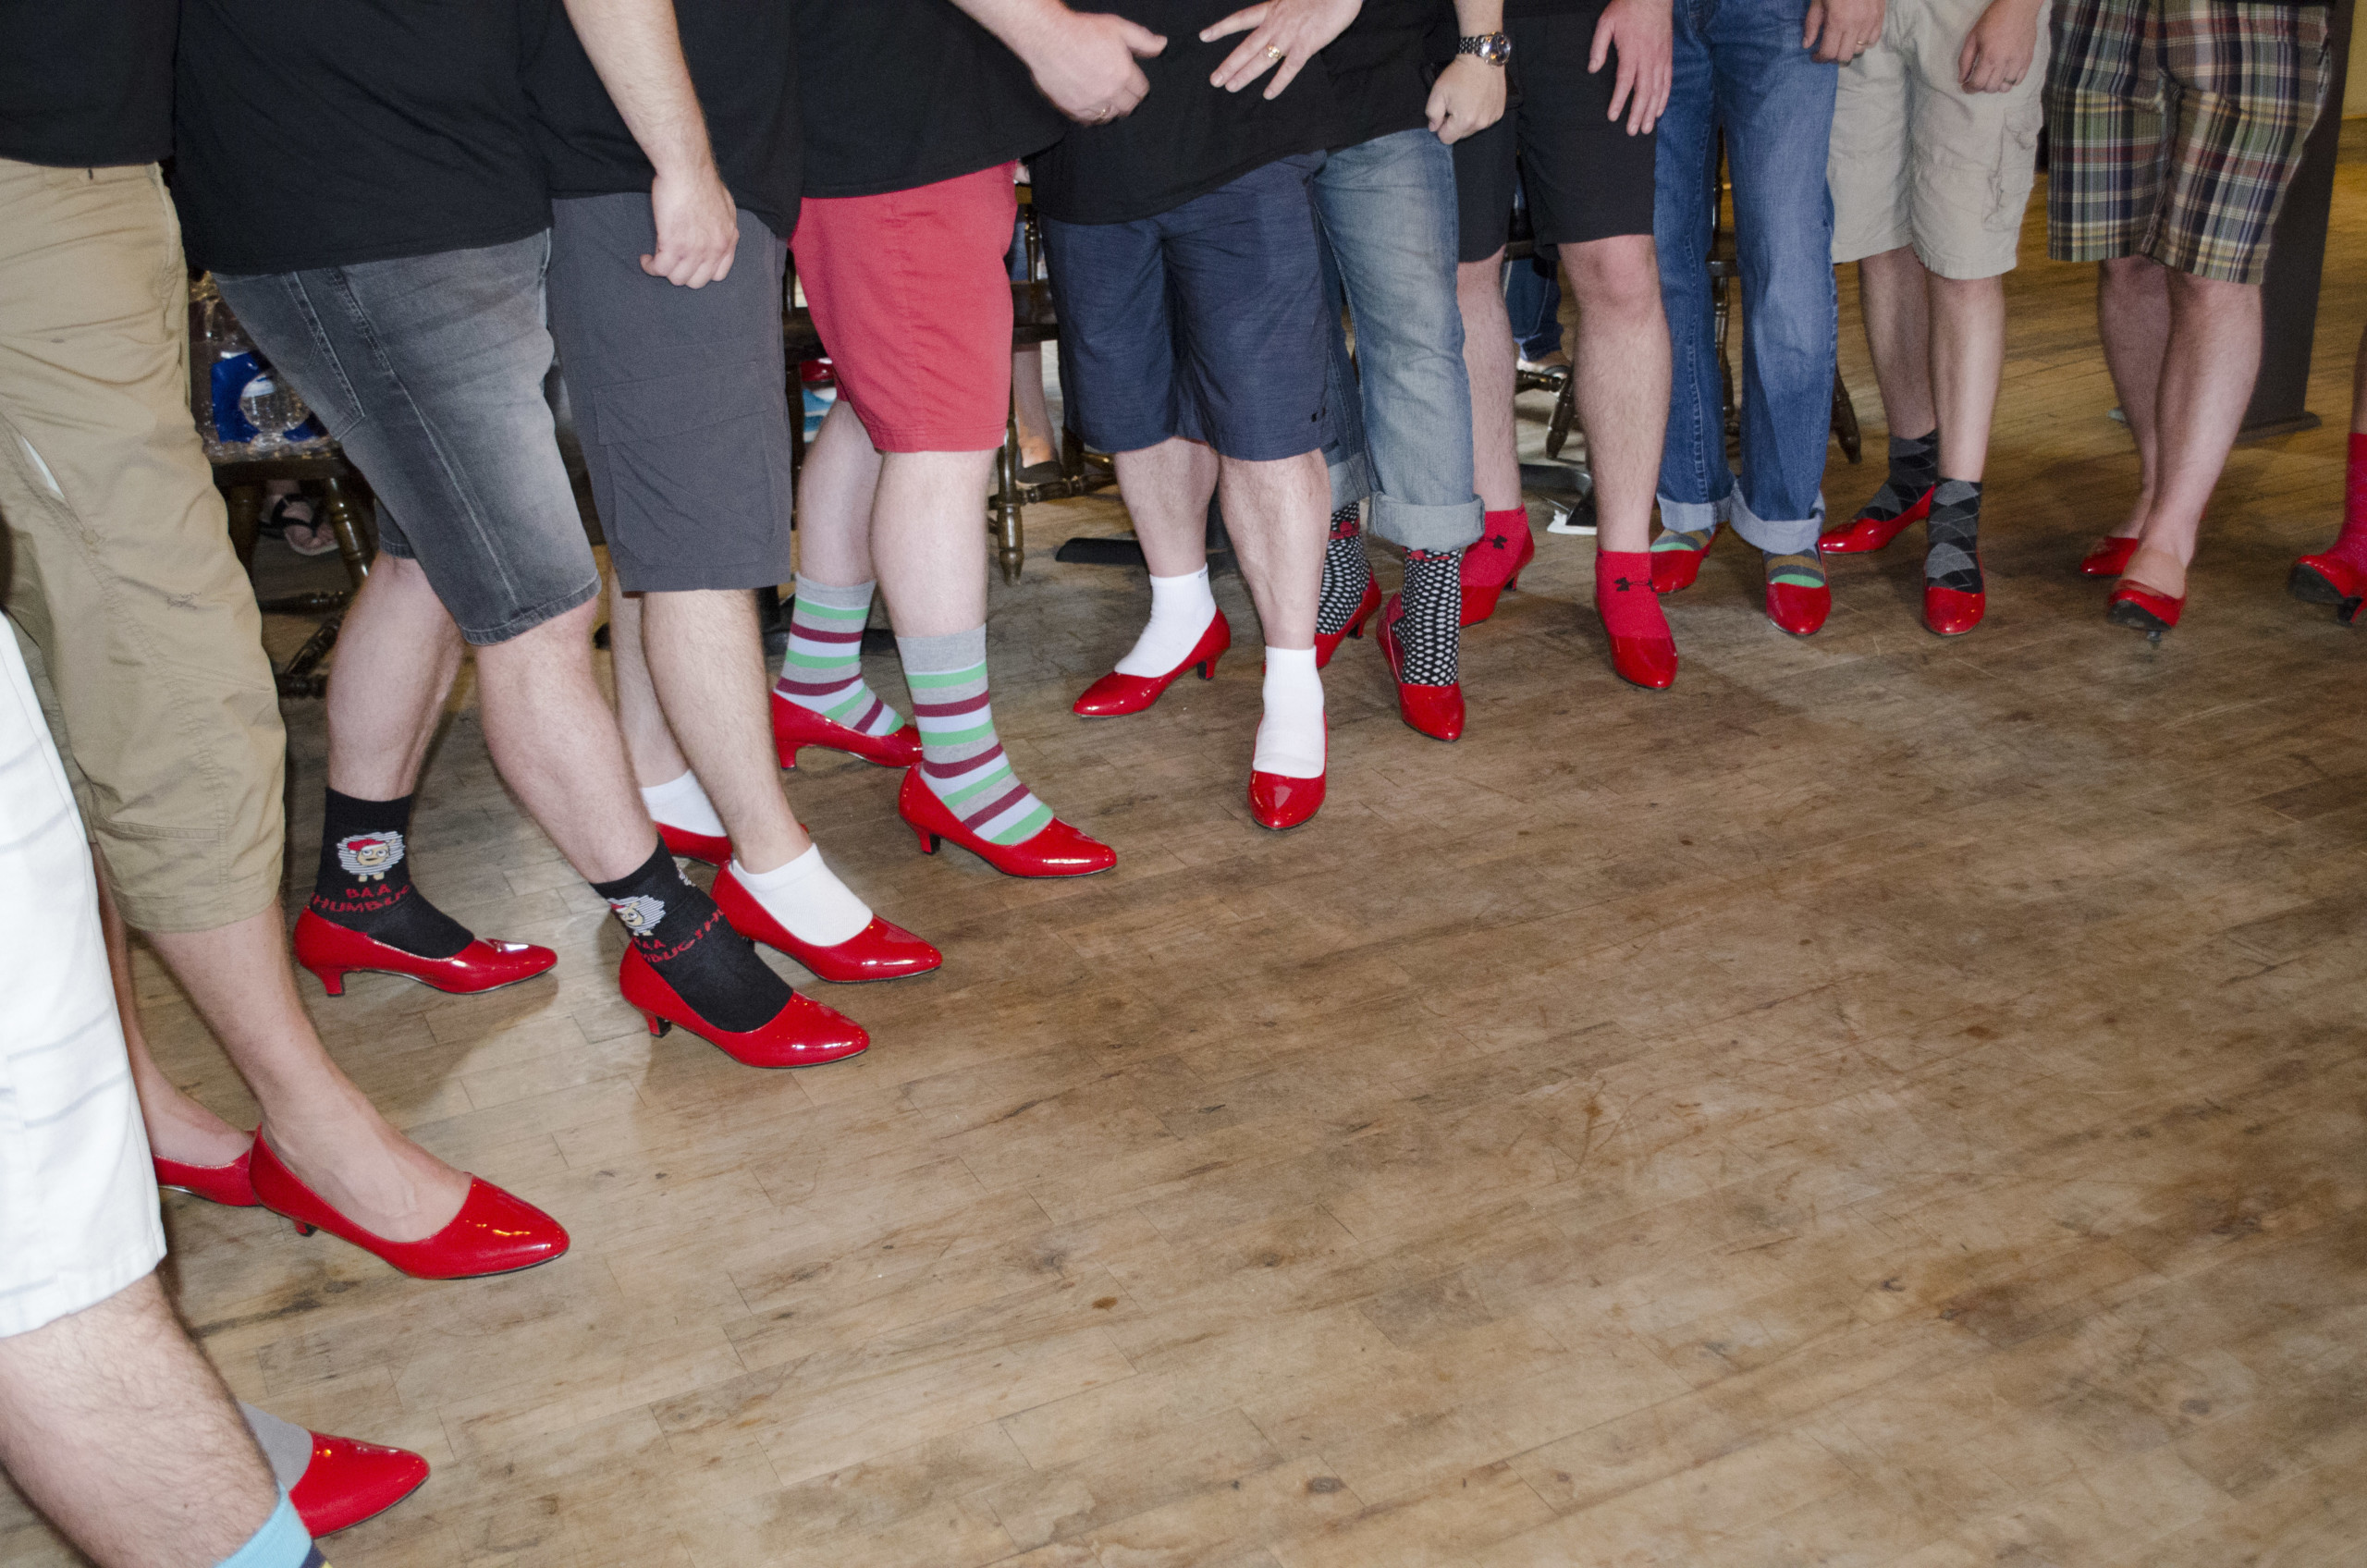 walk a mile in her shoes returns for another year scaled